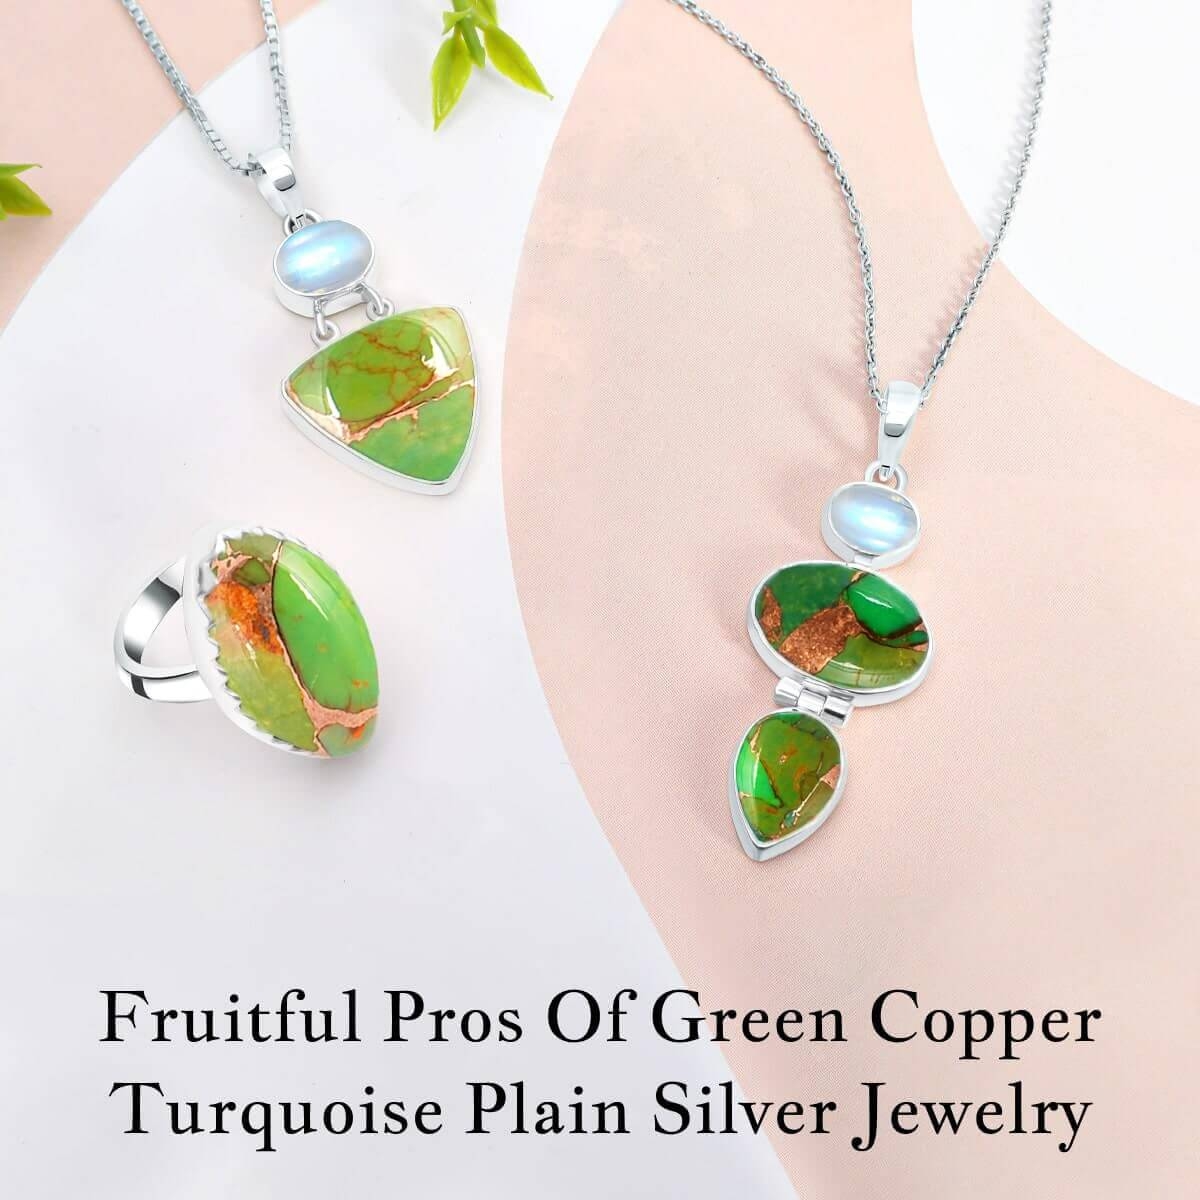 Benefits of Green Copper Turquoise Plain Silver Jewelry